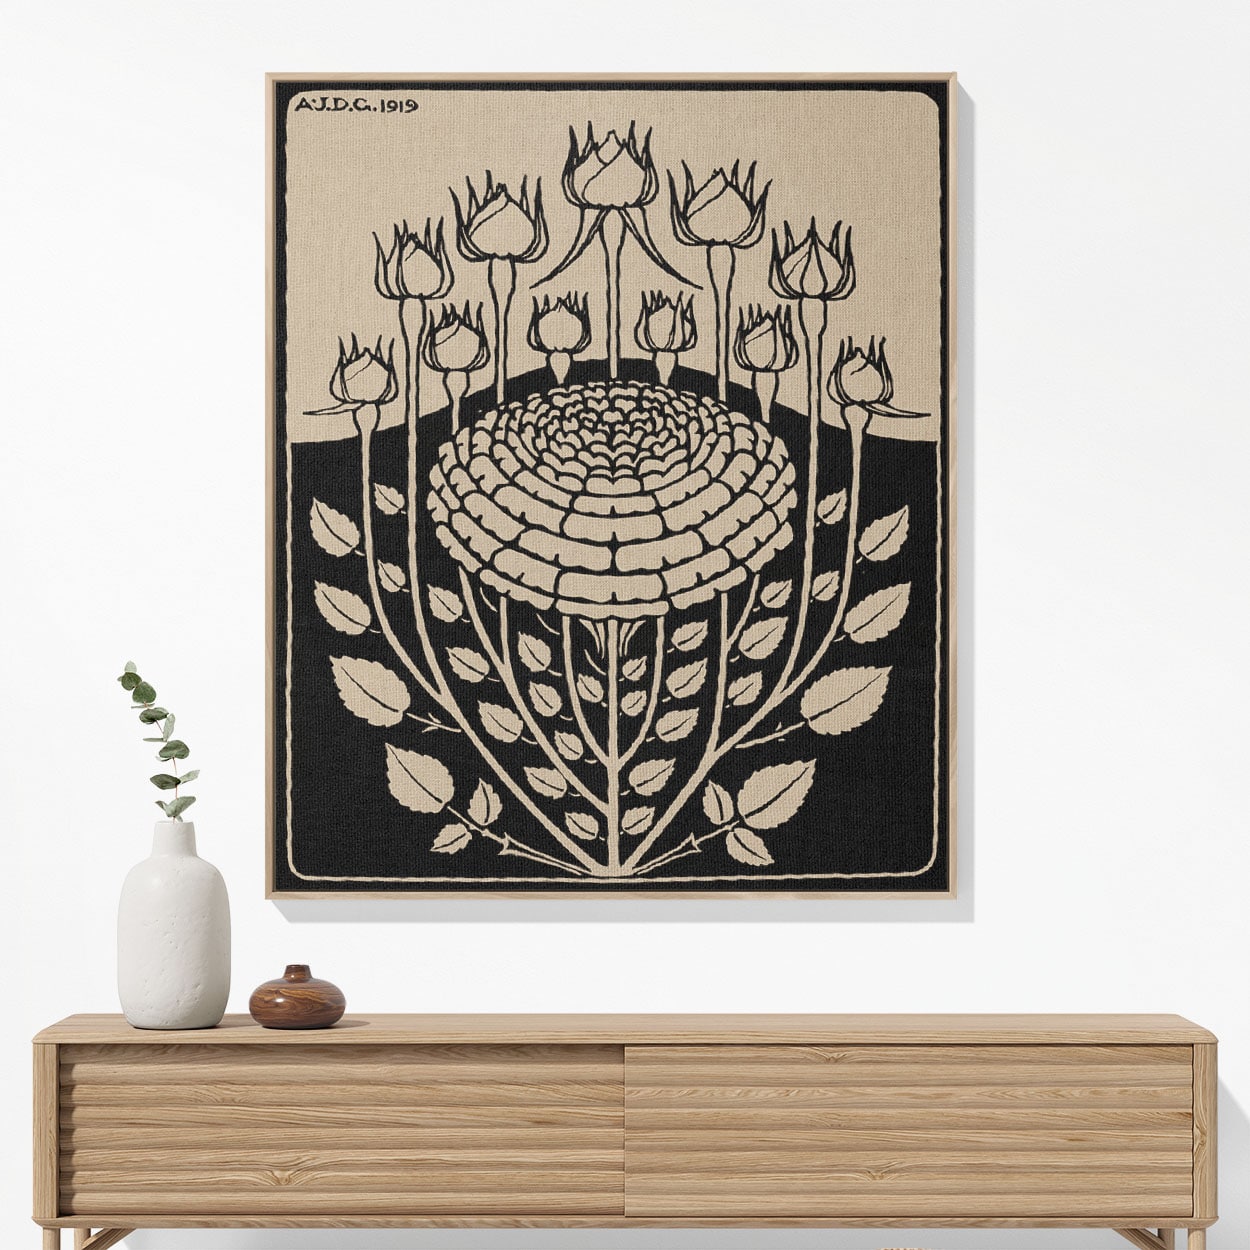 Ink Flower Aesthetic Woven Blanket Woven Blanket Hanging on a Wall as Framed Wall Art